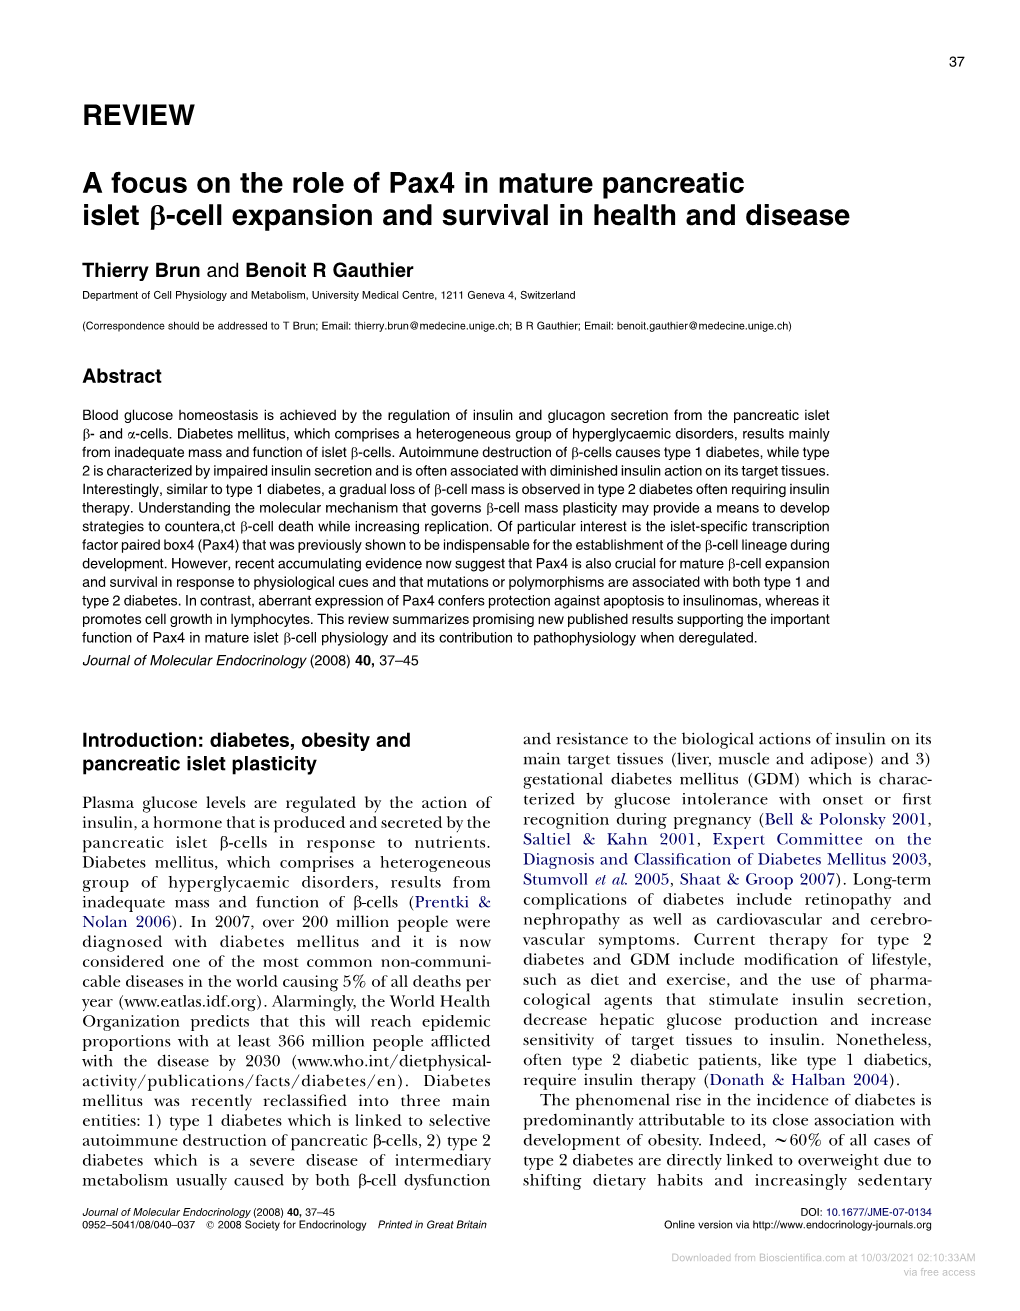 REVIEW a Focus on the Role of Pax4 in Mature Pancreatic Islet B-Cell